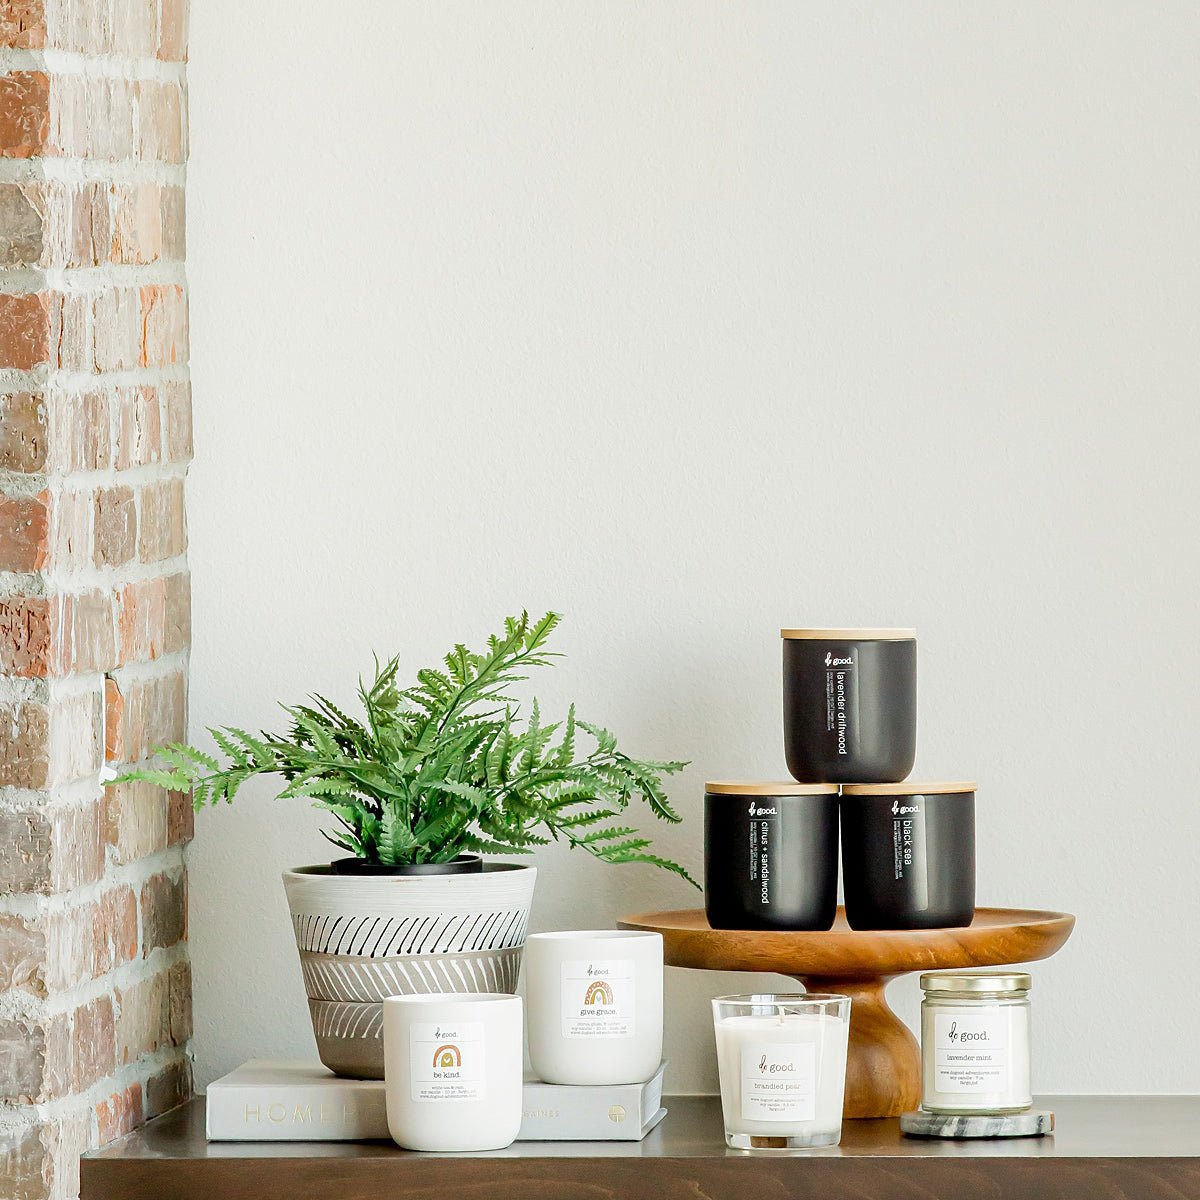 Image of various candle styles and collections styled together on a shelf